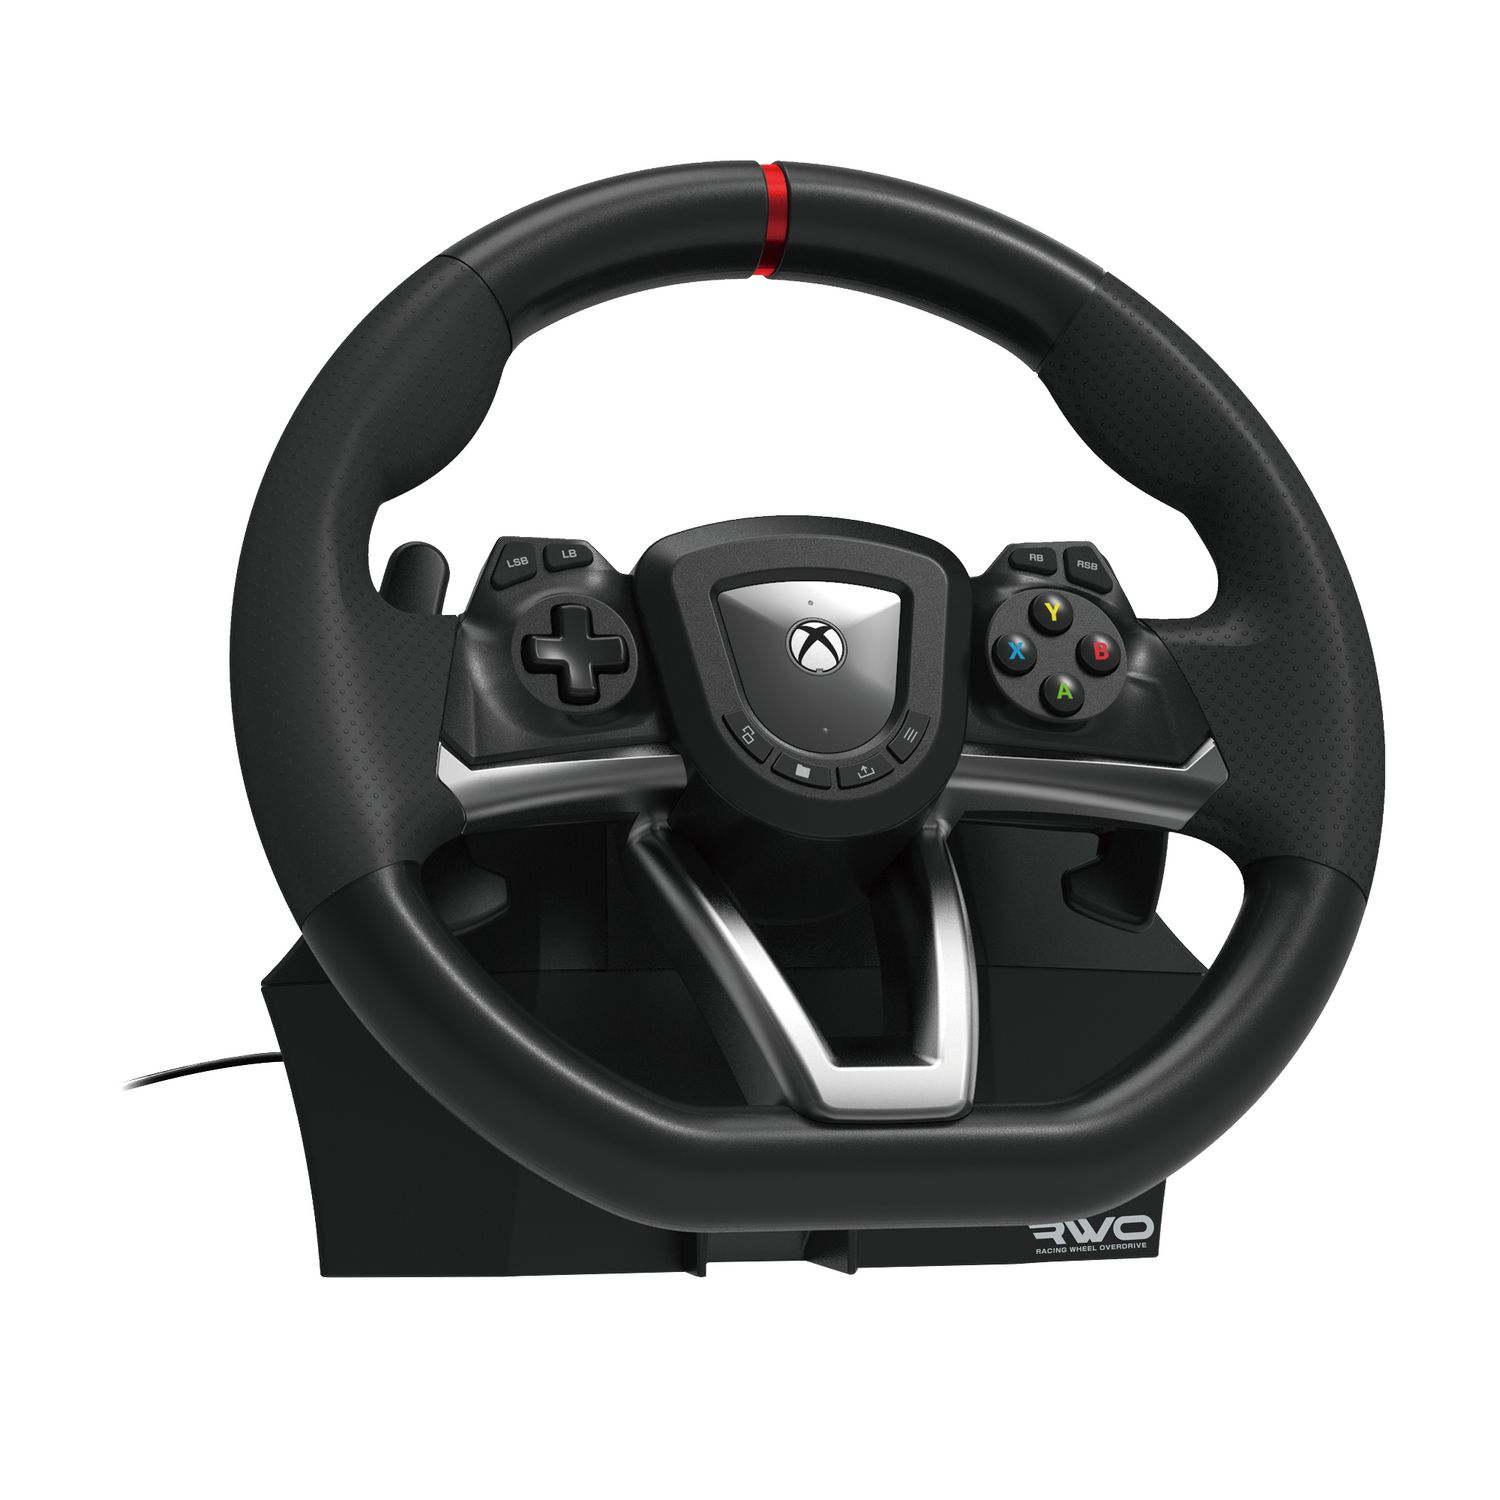  Truck Driving Simulator, USB 900° Car Gaming Steering Wheel,  Hand Brake + Clutch Pedal, Compatable Window PC/Laptop,Black : Everything  Else